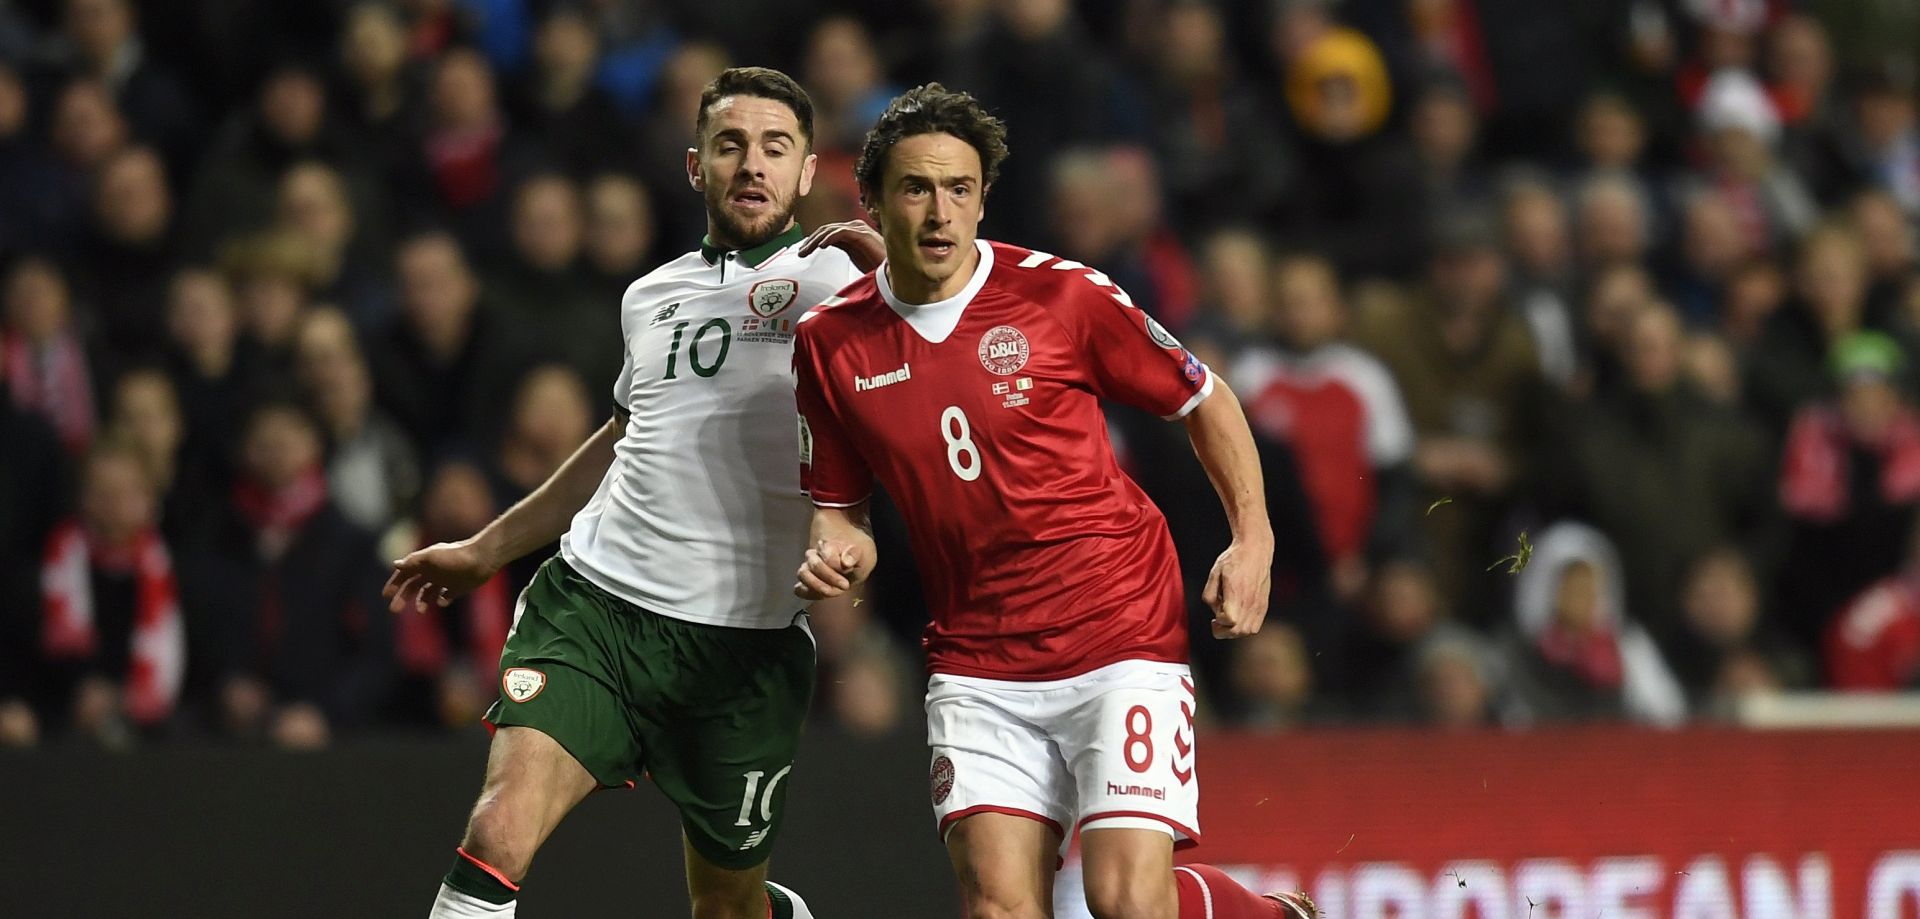 epa06323462 Robbie Brady (L) of Ireland in action against Thomas Delaney of Denmark during the FIFA World Cup 2018 play-off first leg soccer match between Denmark and Ireland in Copenhagen, Denmark, 11 November 2017.  EPA/LARS MOELLER  DENMARK OUT